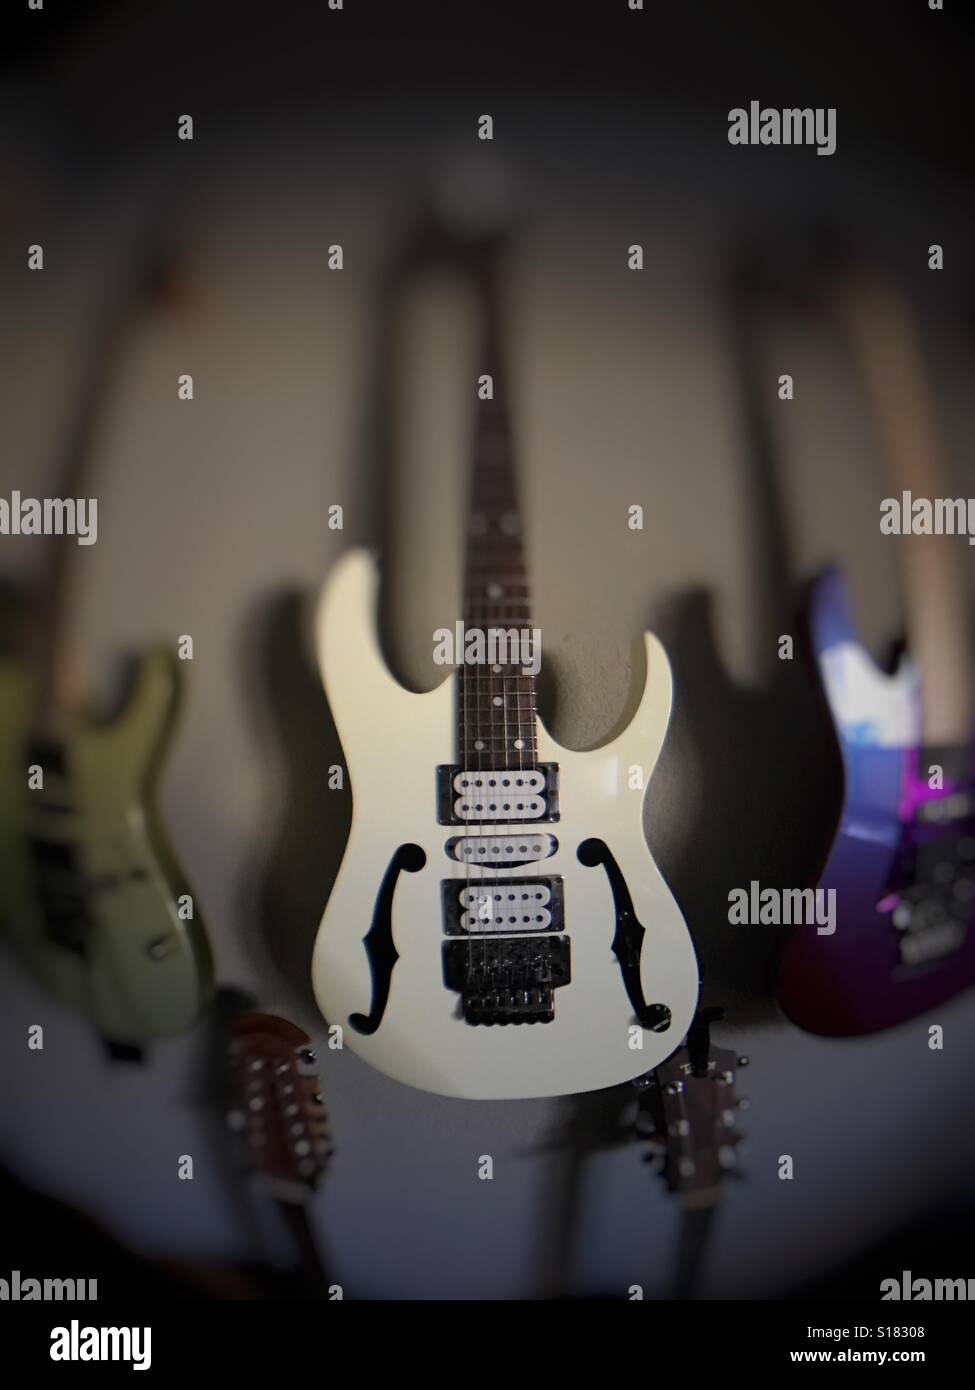 Wide angle view of electric guitars hanging on a wall Stock Photo